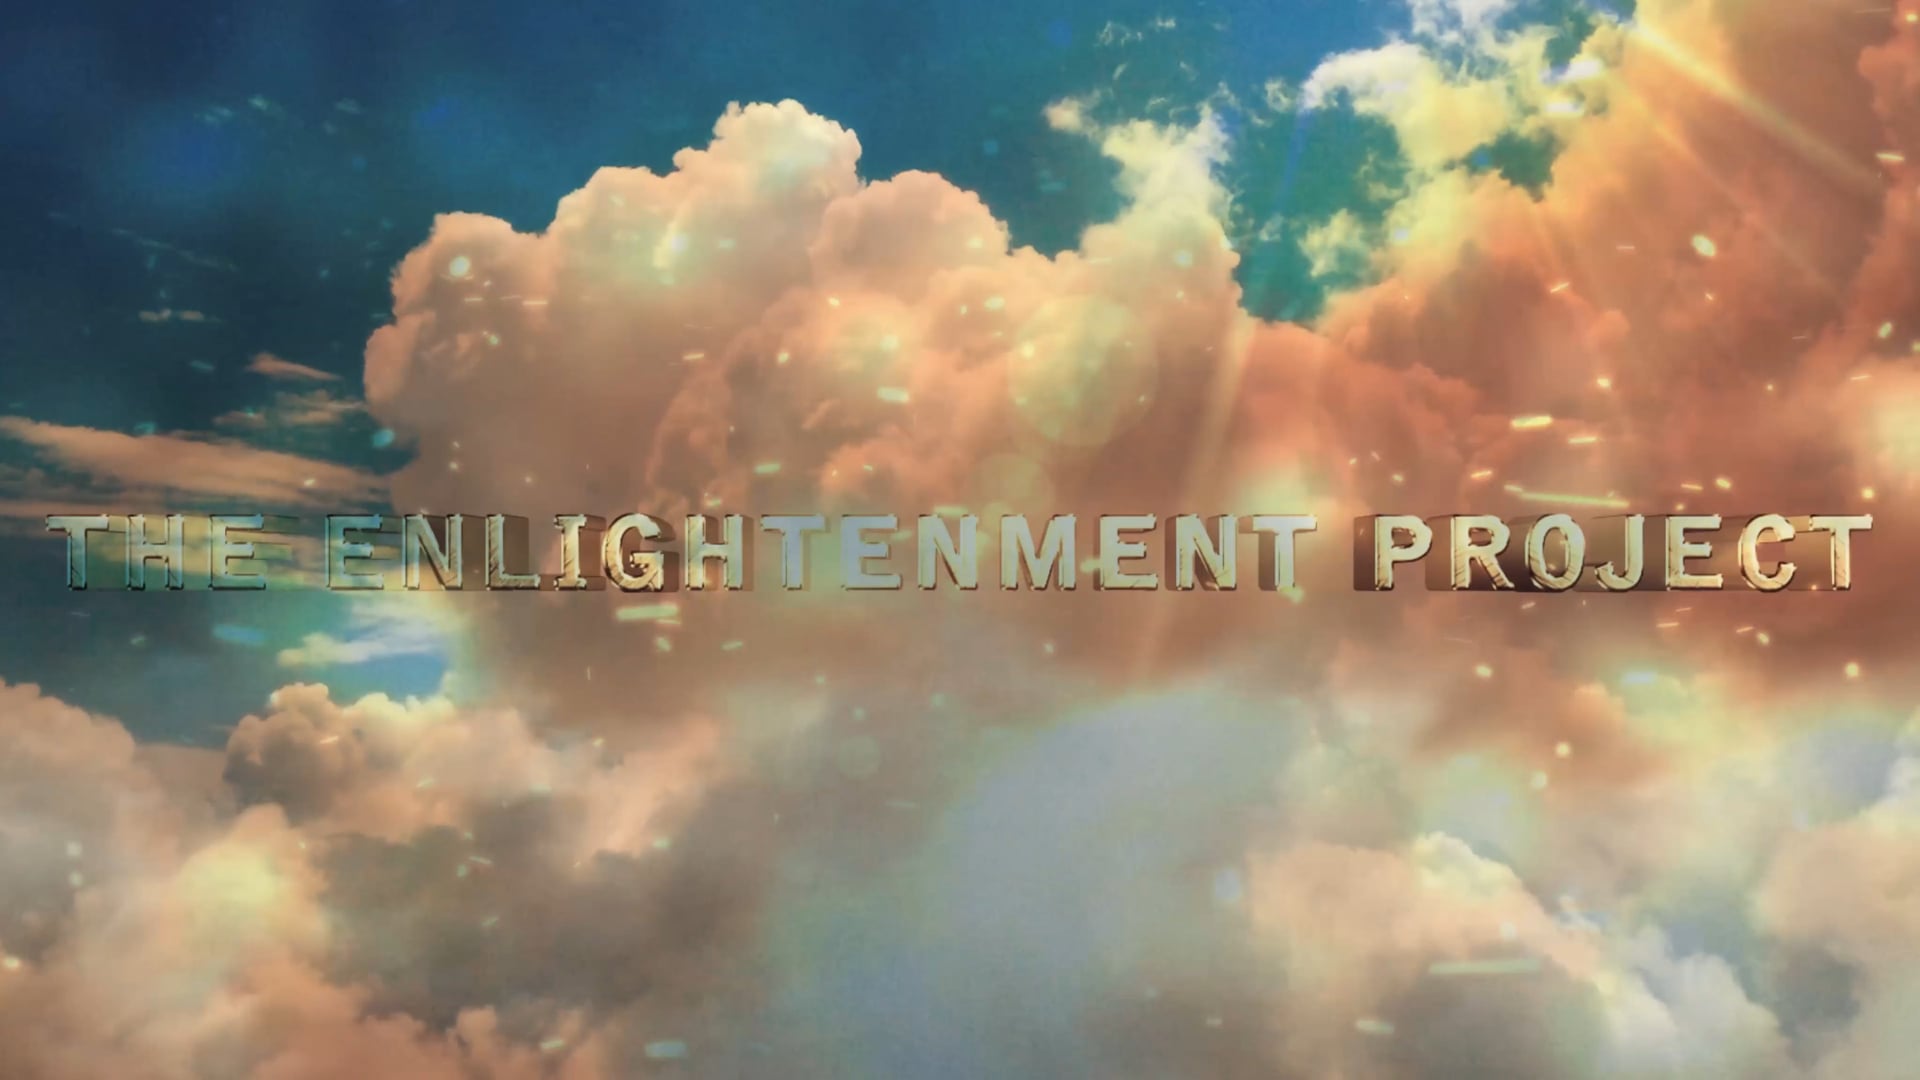 The Enlightenment Project - Short Documentary